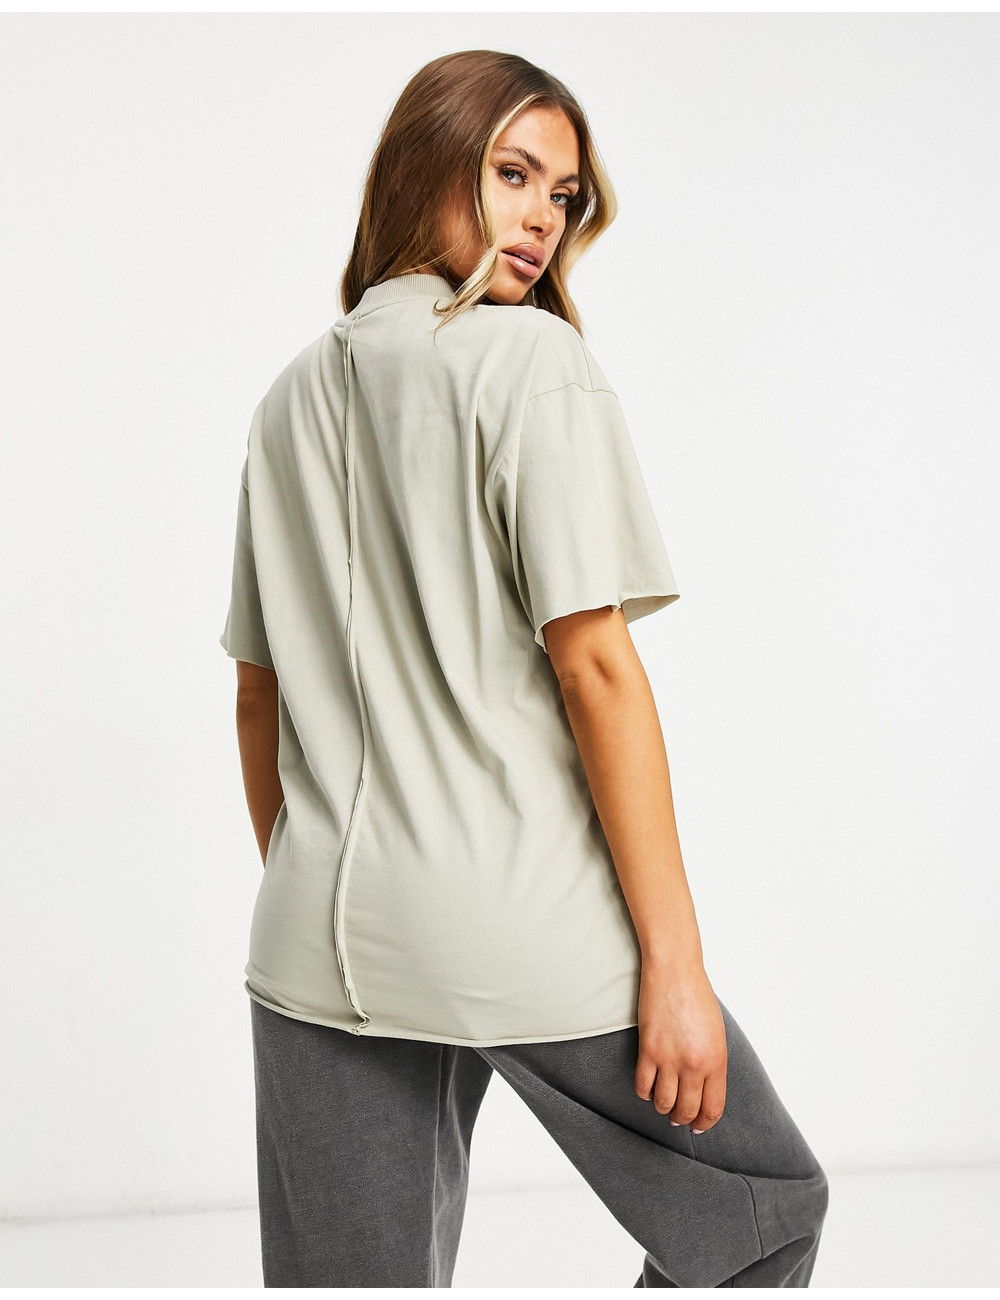 ASYOU oversized t-shirt in...